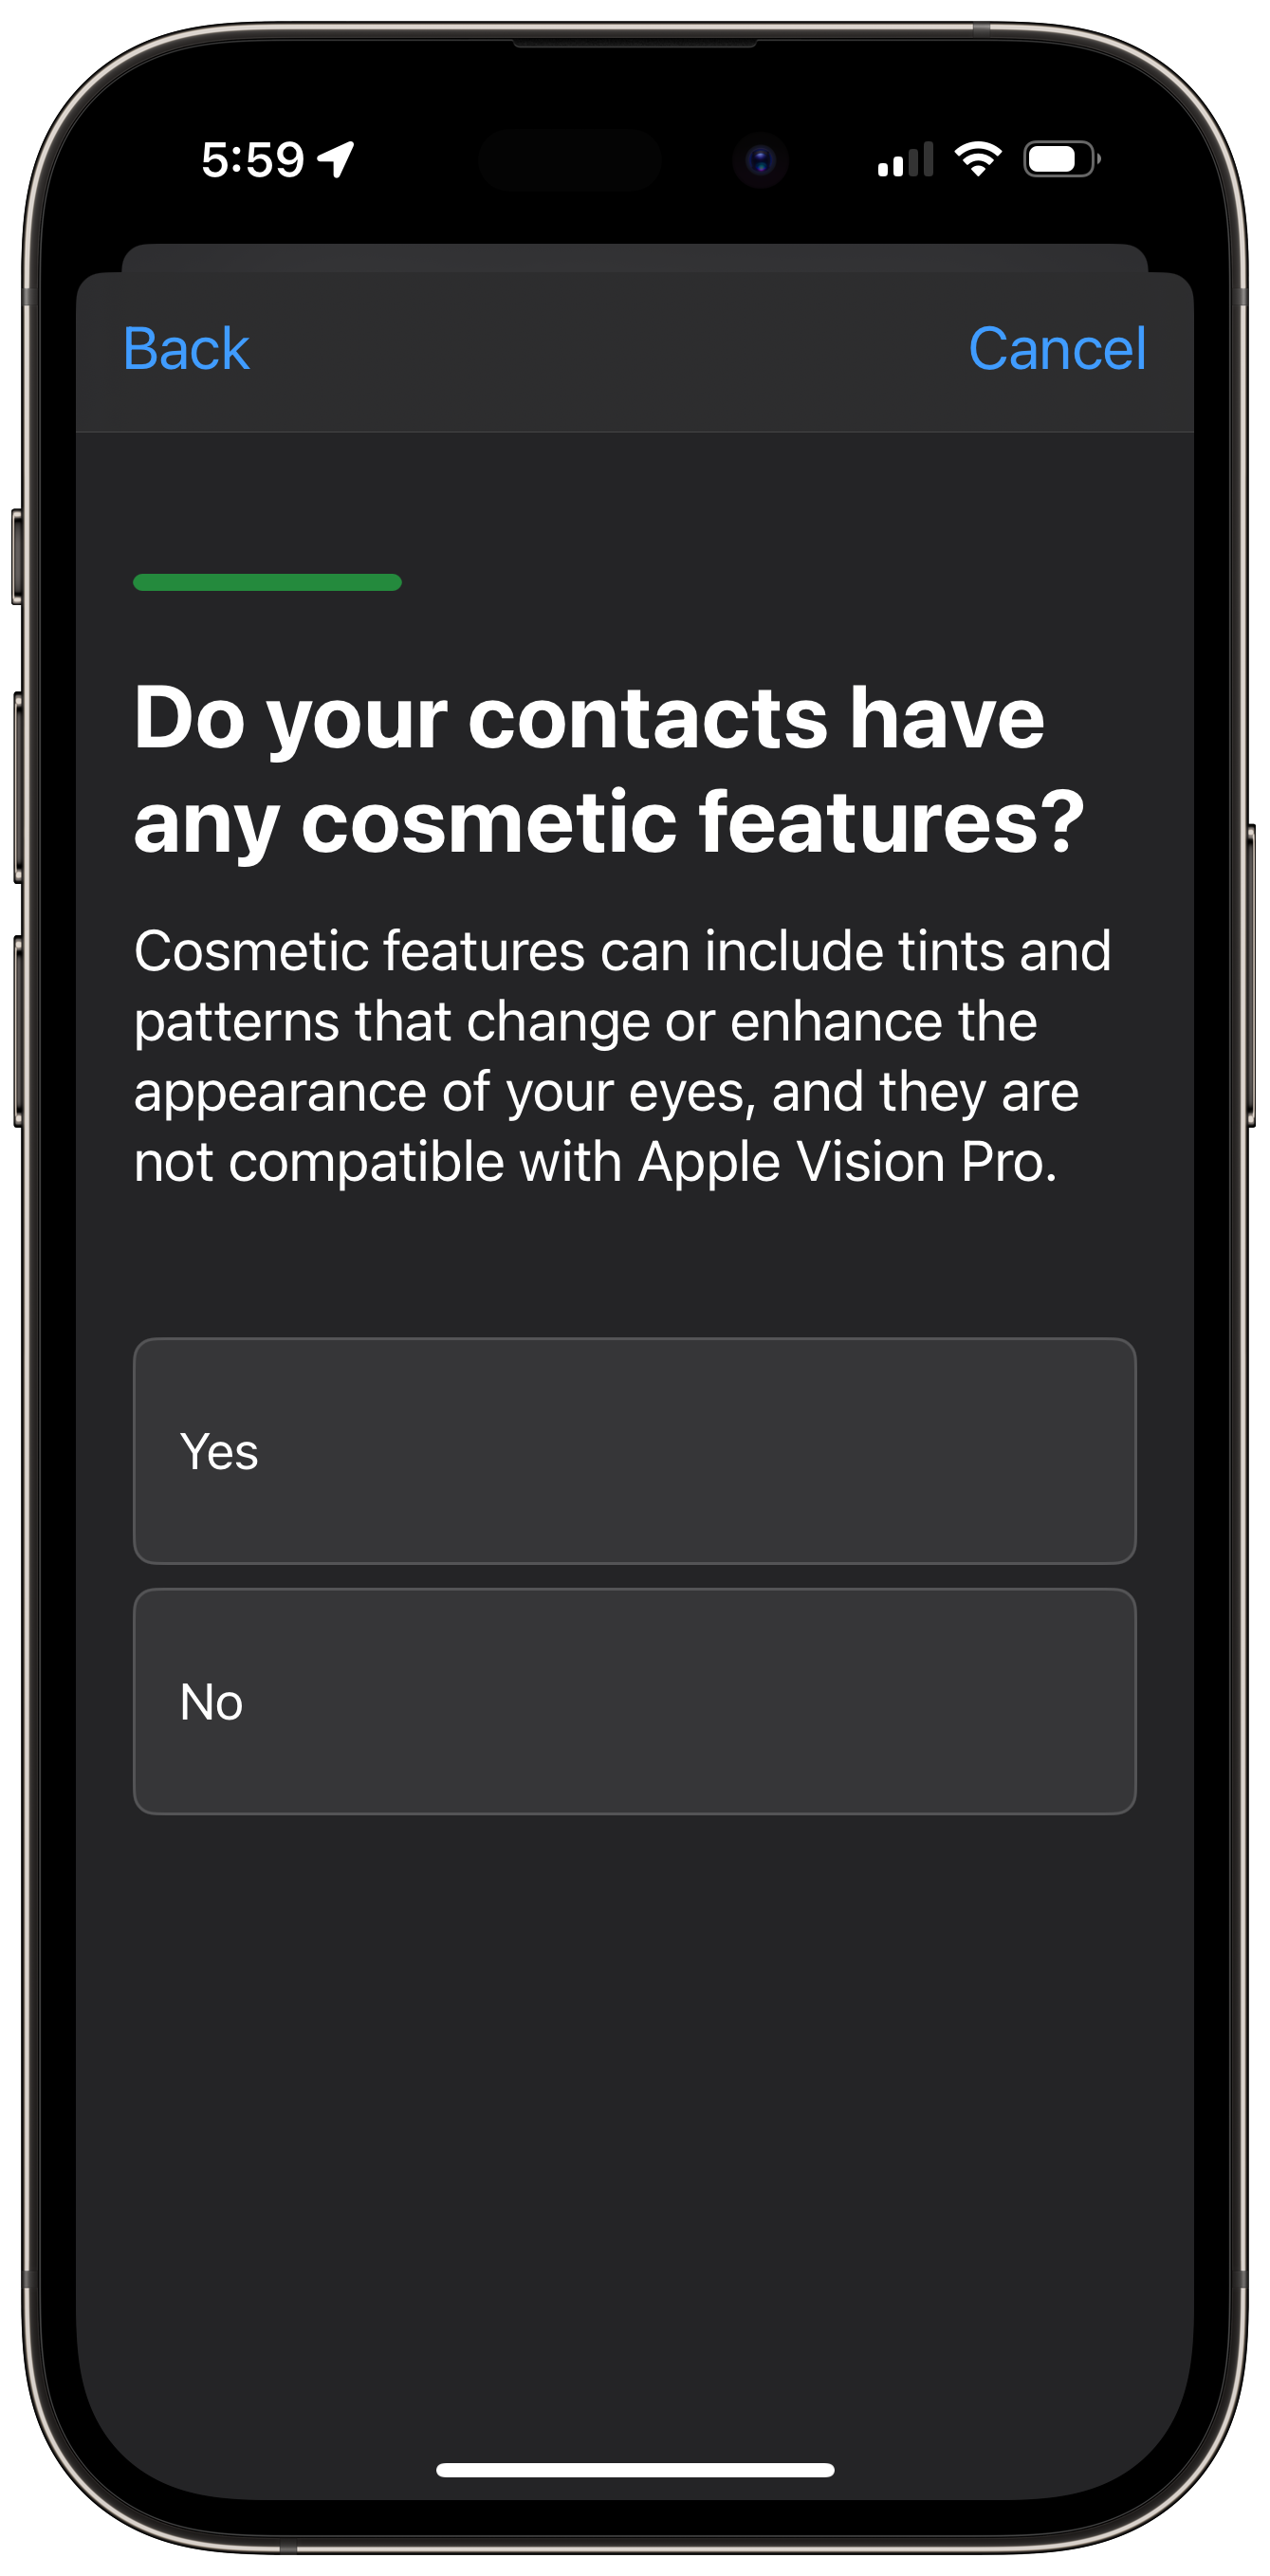 A screenshot from the Apple Store app on iOS. "Do your contacts have any cosmetic features? Cosmetic features can include tints and patterns that change or enhance the appearance of your eyes, and they are not compatible with Apple Vision Pro." Buttons are available for Yes and No.